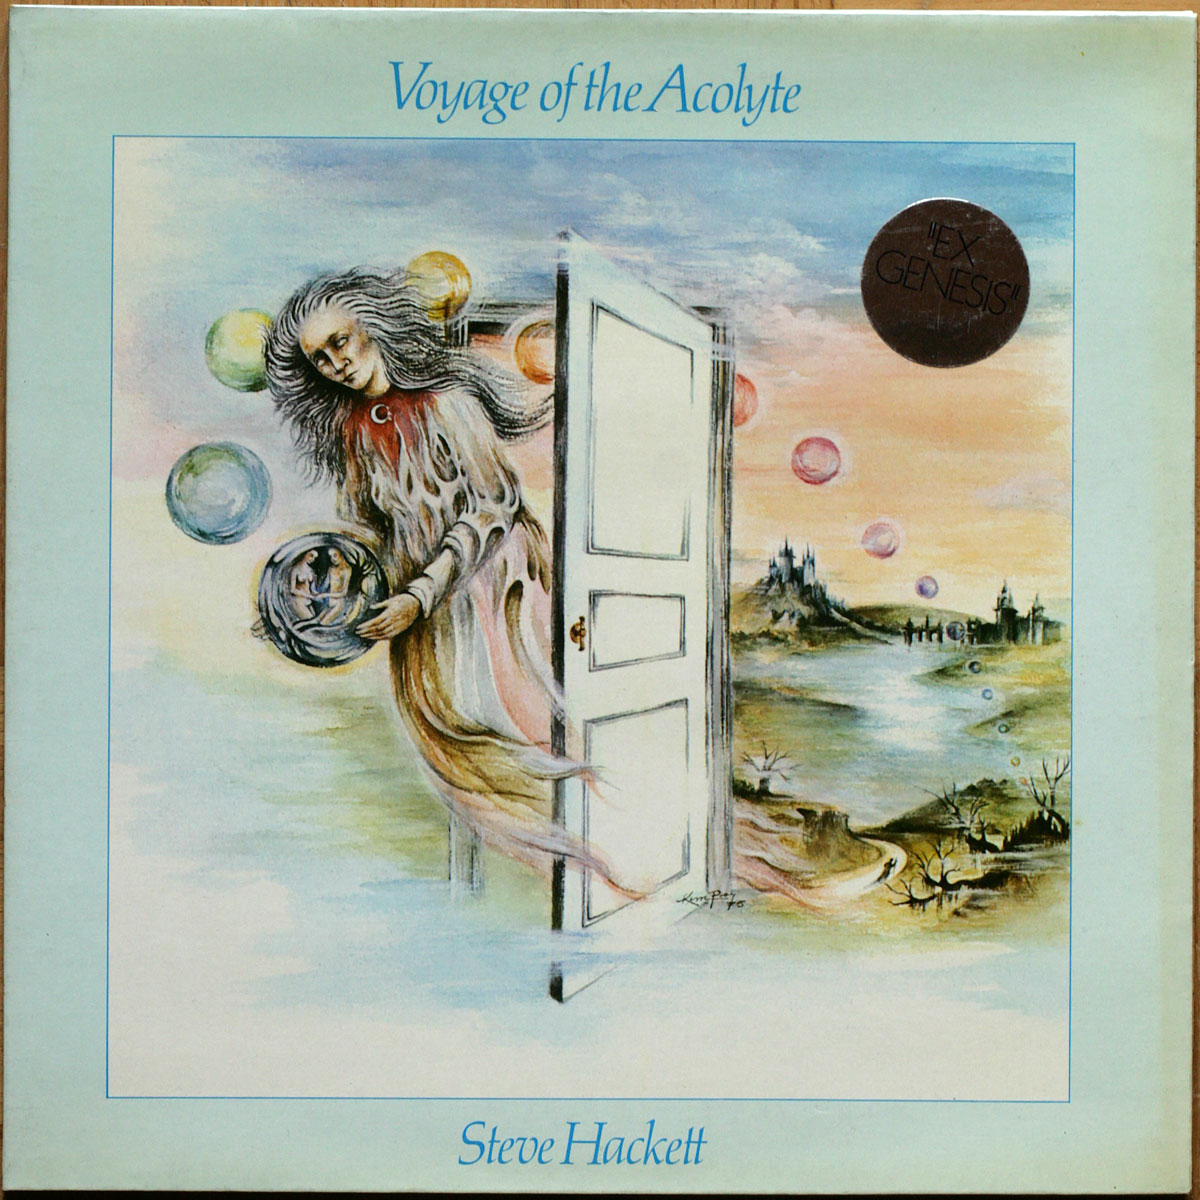 Steve Hackett • Voyage of the Acolyte • Charisma 9103 106 • Phil Collins • Mike Rutherford • Percy Jones • John Acock • Sally Oldfield